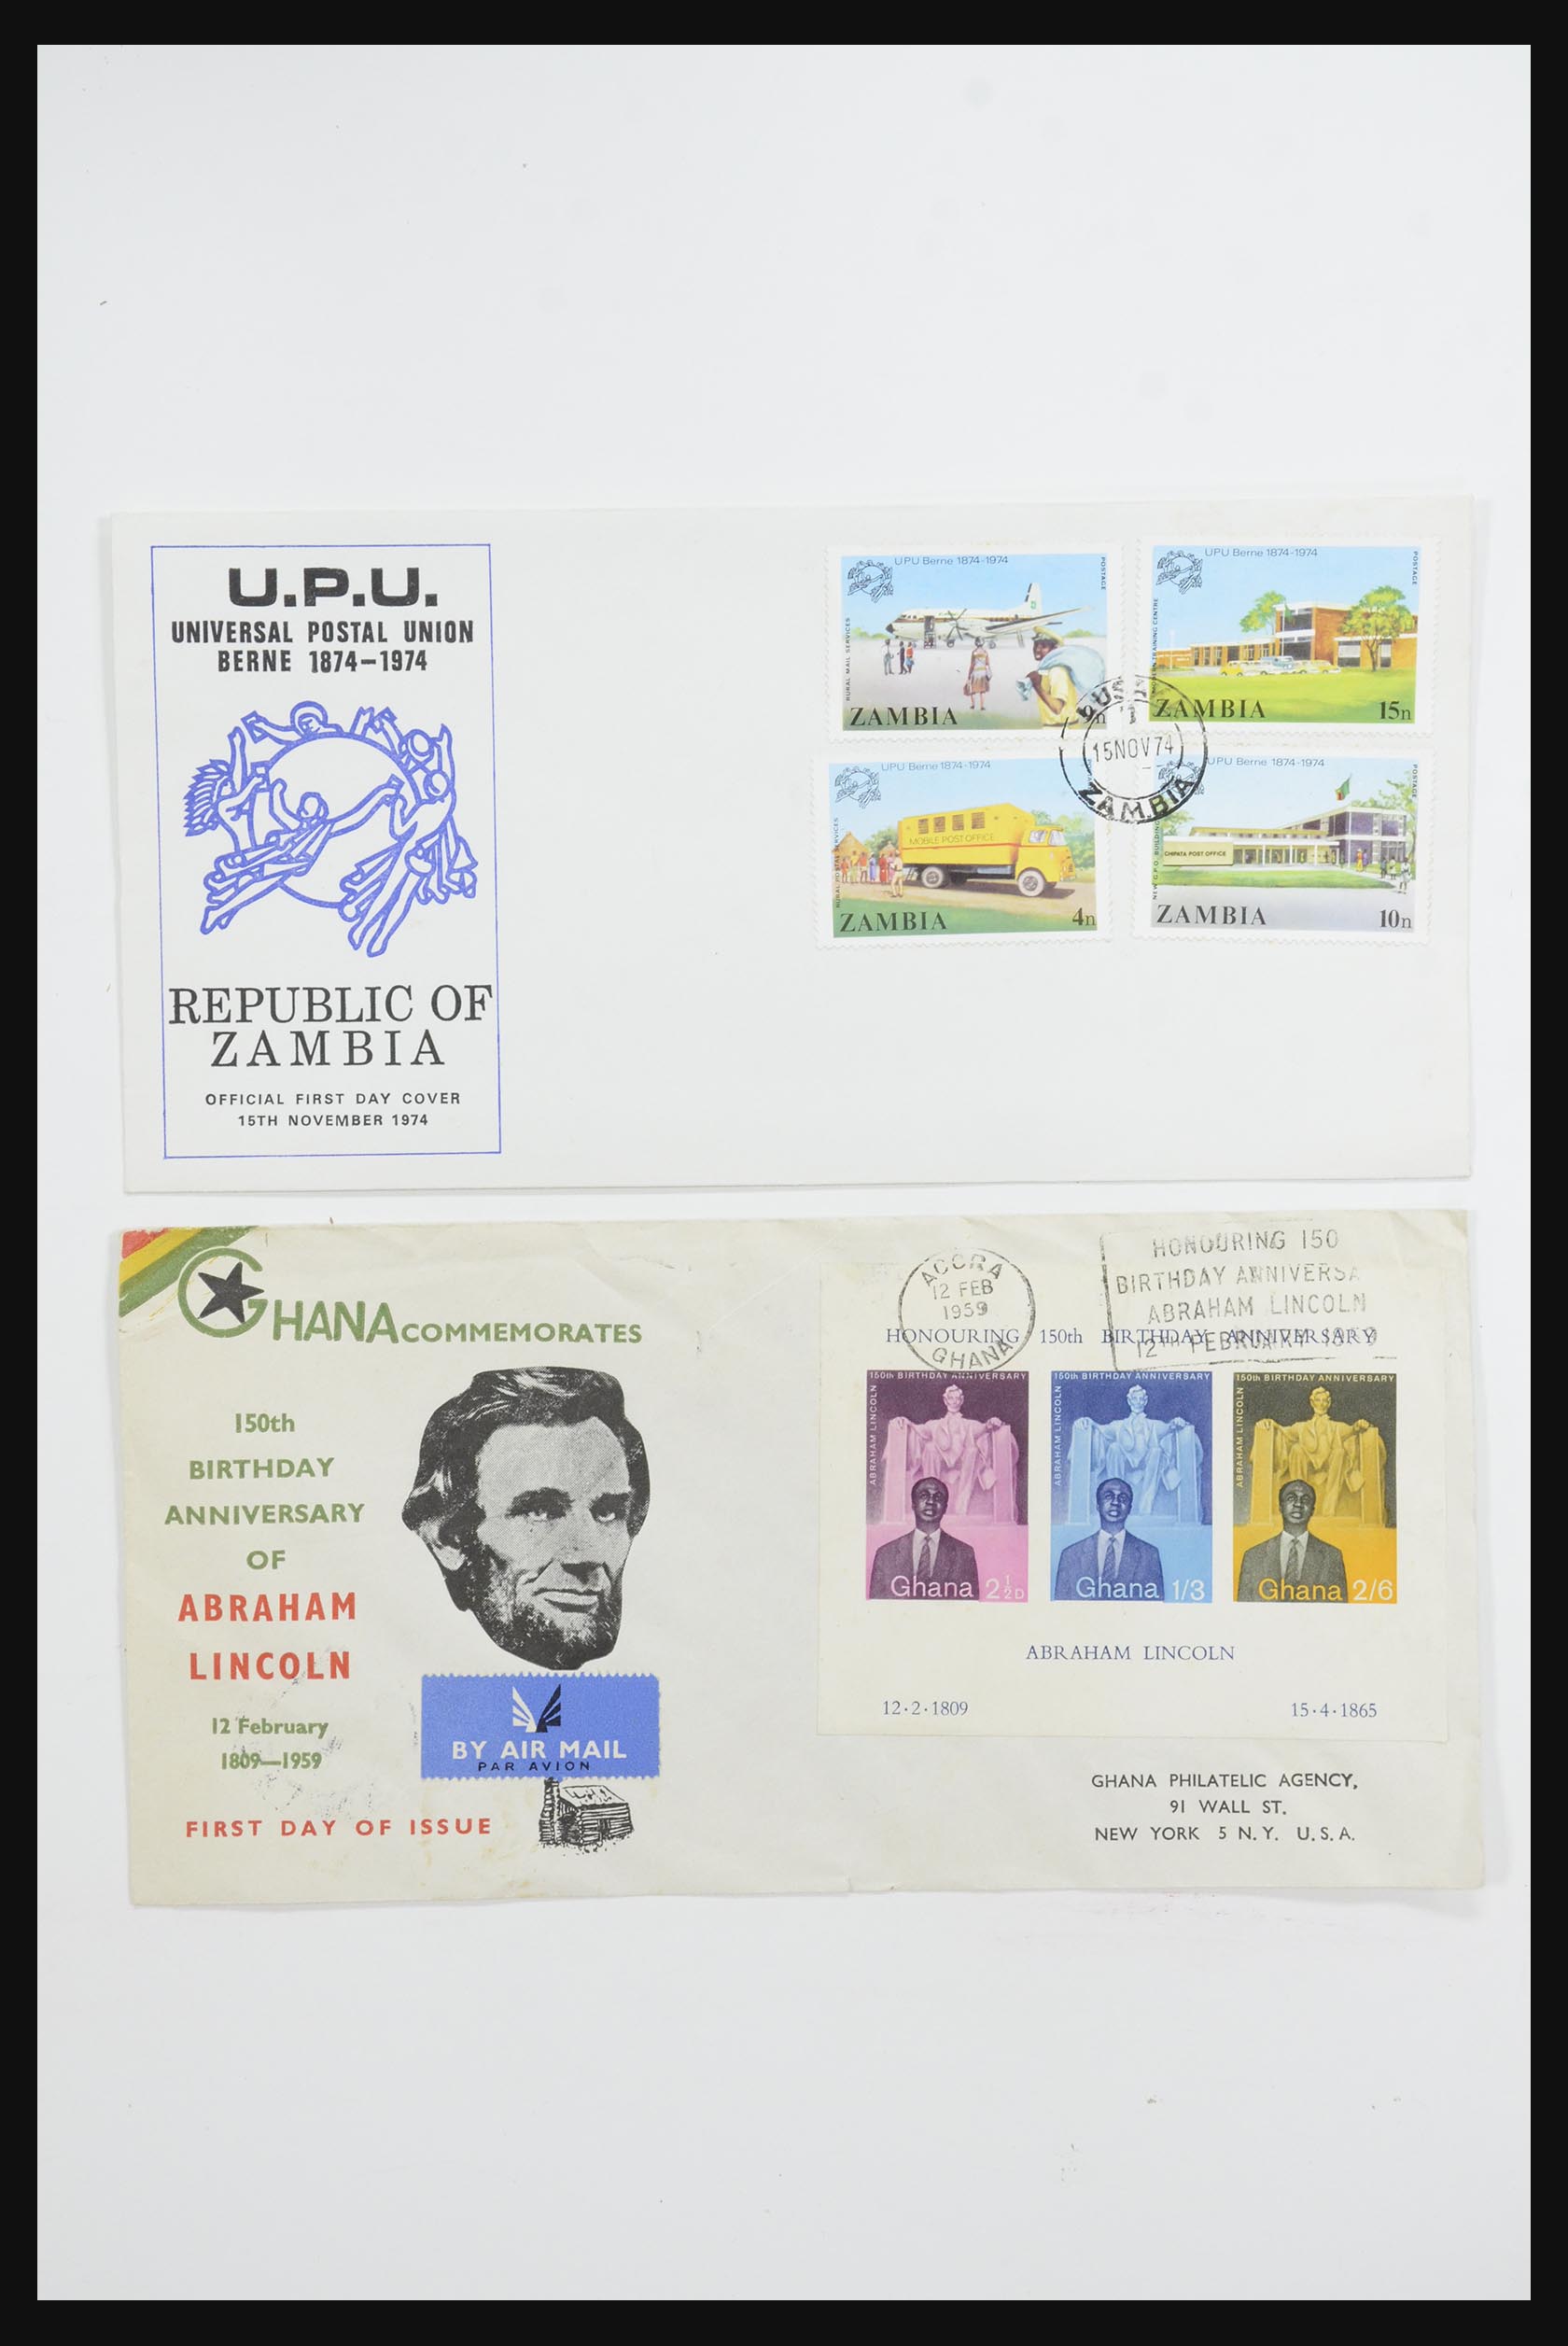 31726 051 - 31726 Great Britain and colonies covers and FDC's 1937-2001.